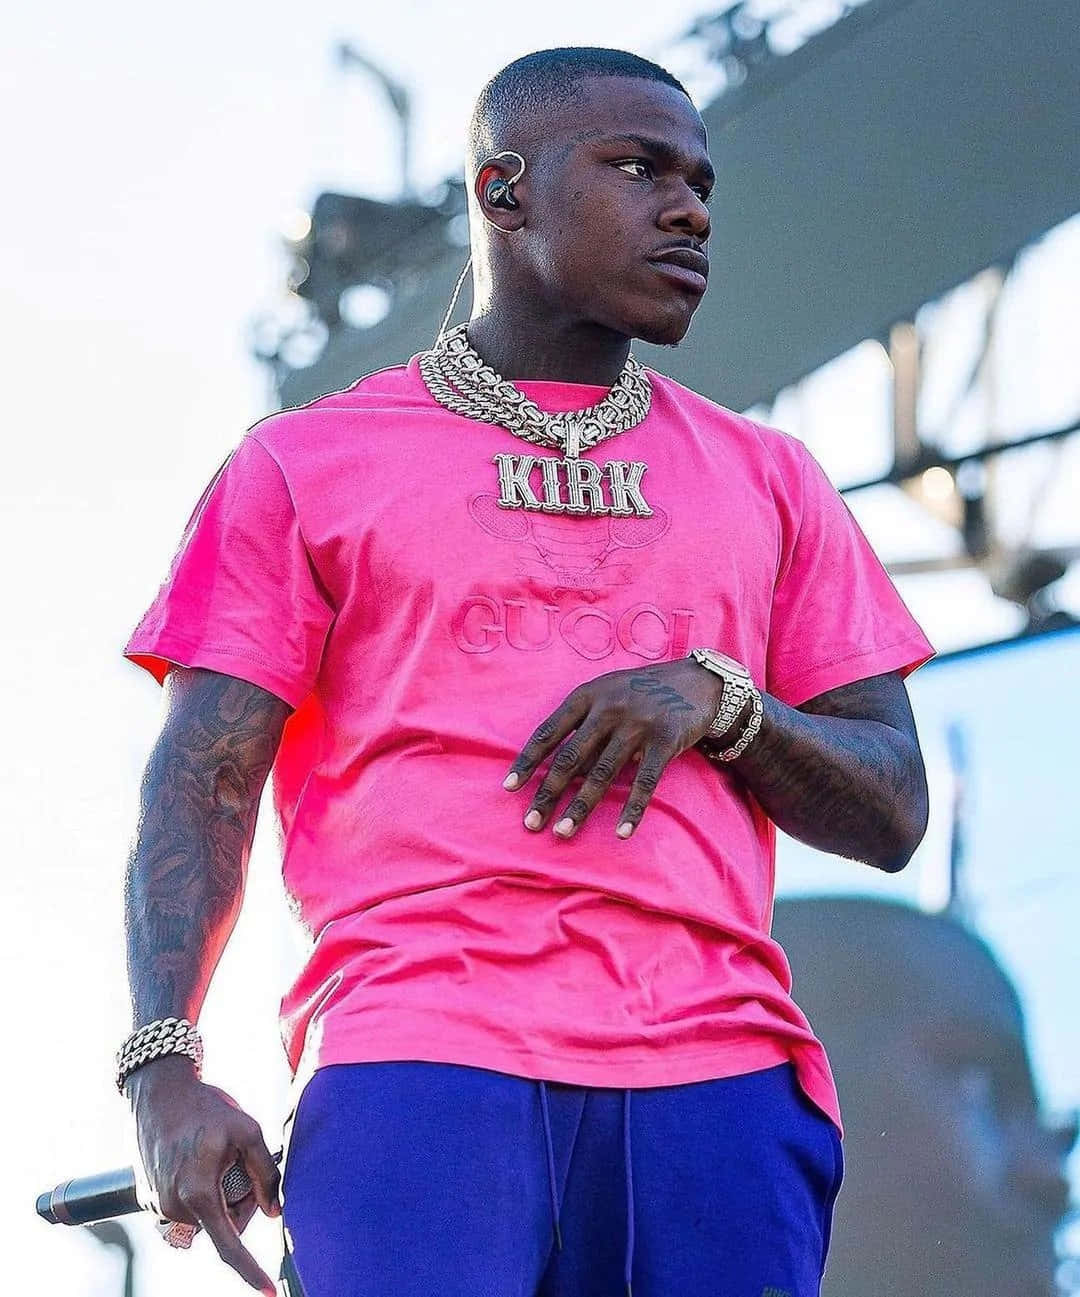 DaBaby performs energetically on stage in front of an excited crowd.